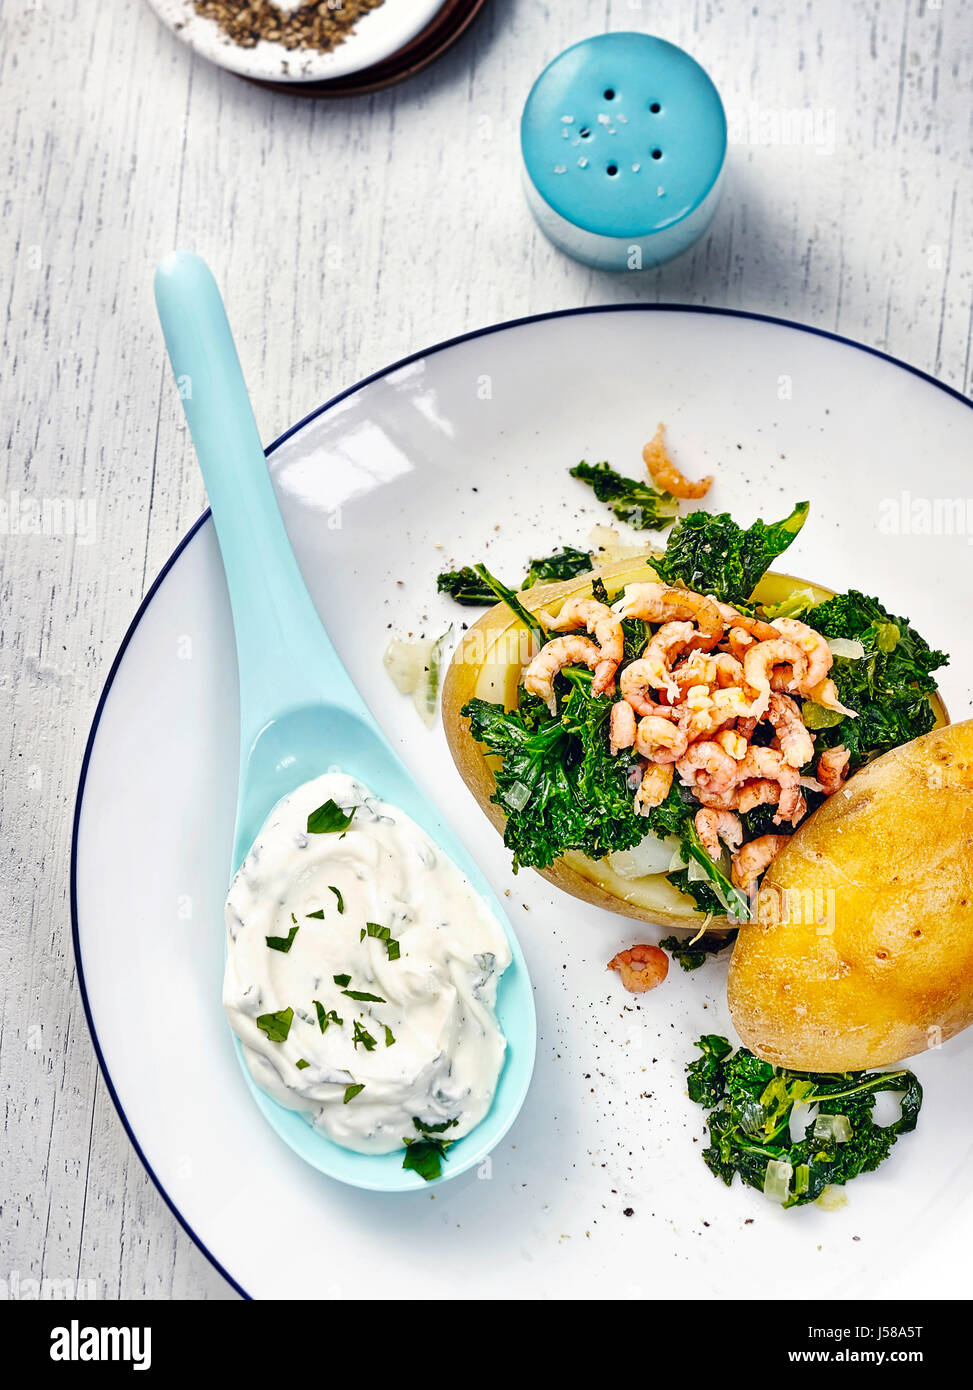 Baked potato with kale and shrimps Stock Photo